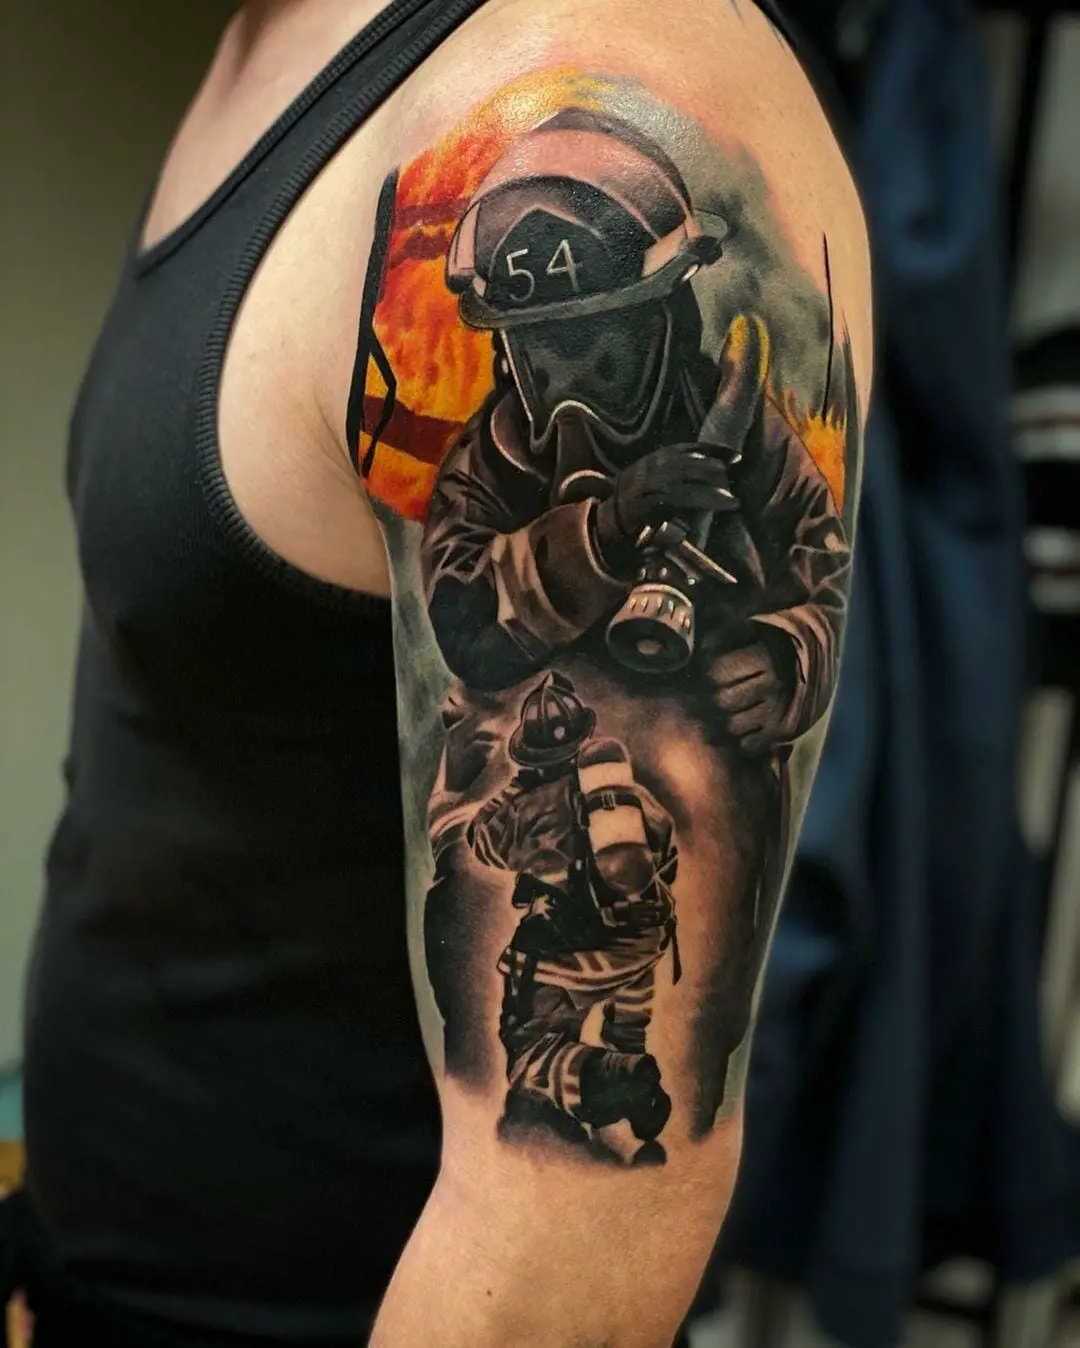 Stunning 23 Burning Hot Firefighter Tattoos You Need To See! - Psycho Tats